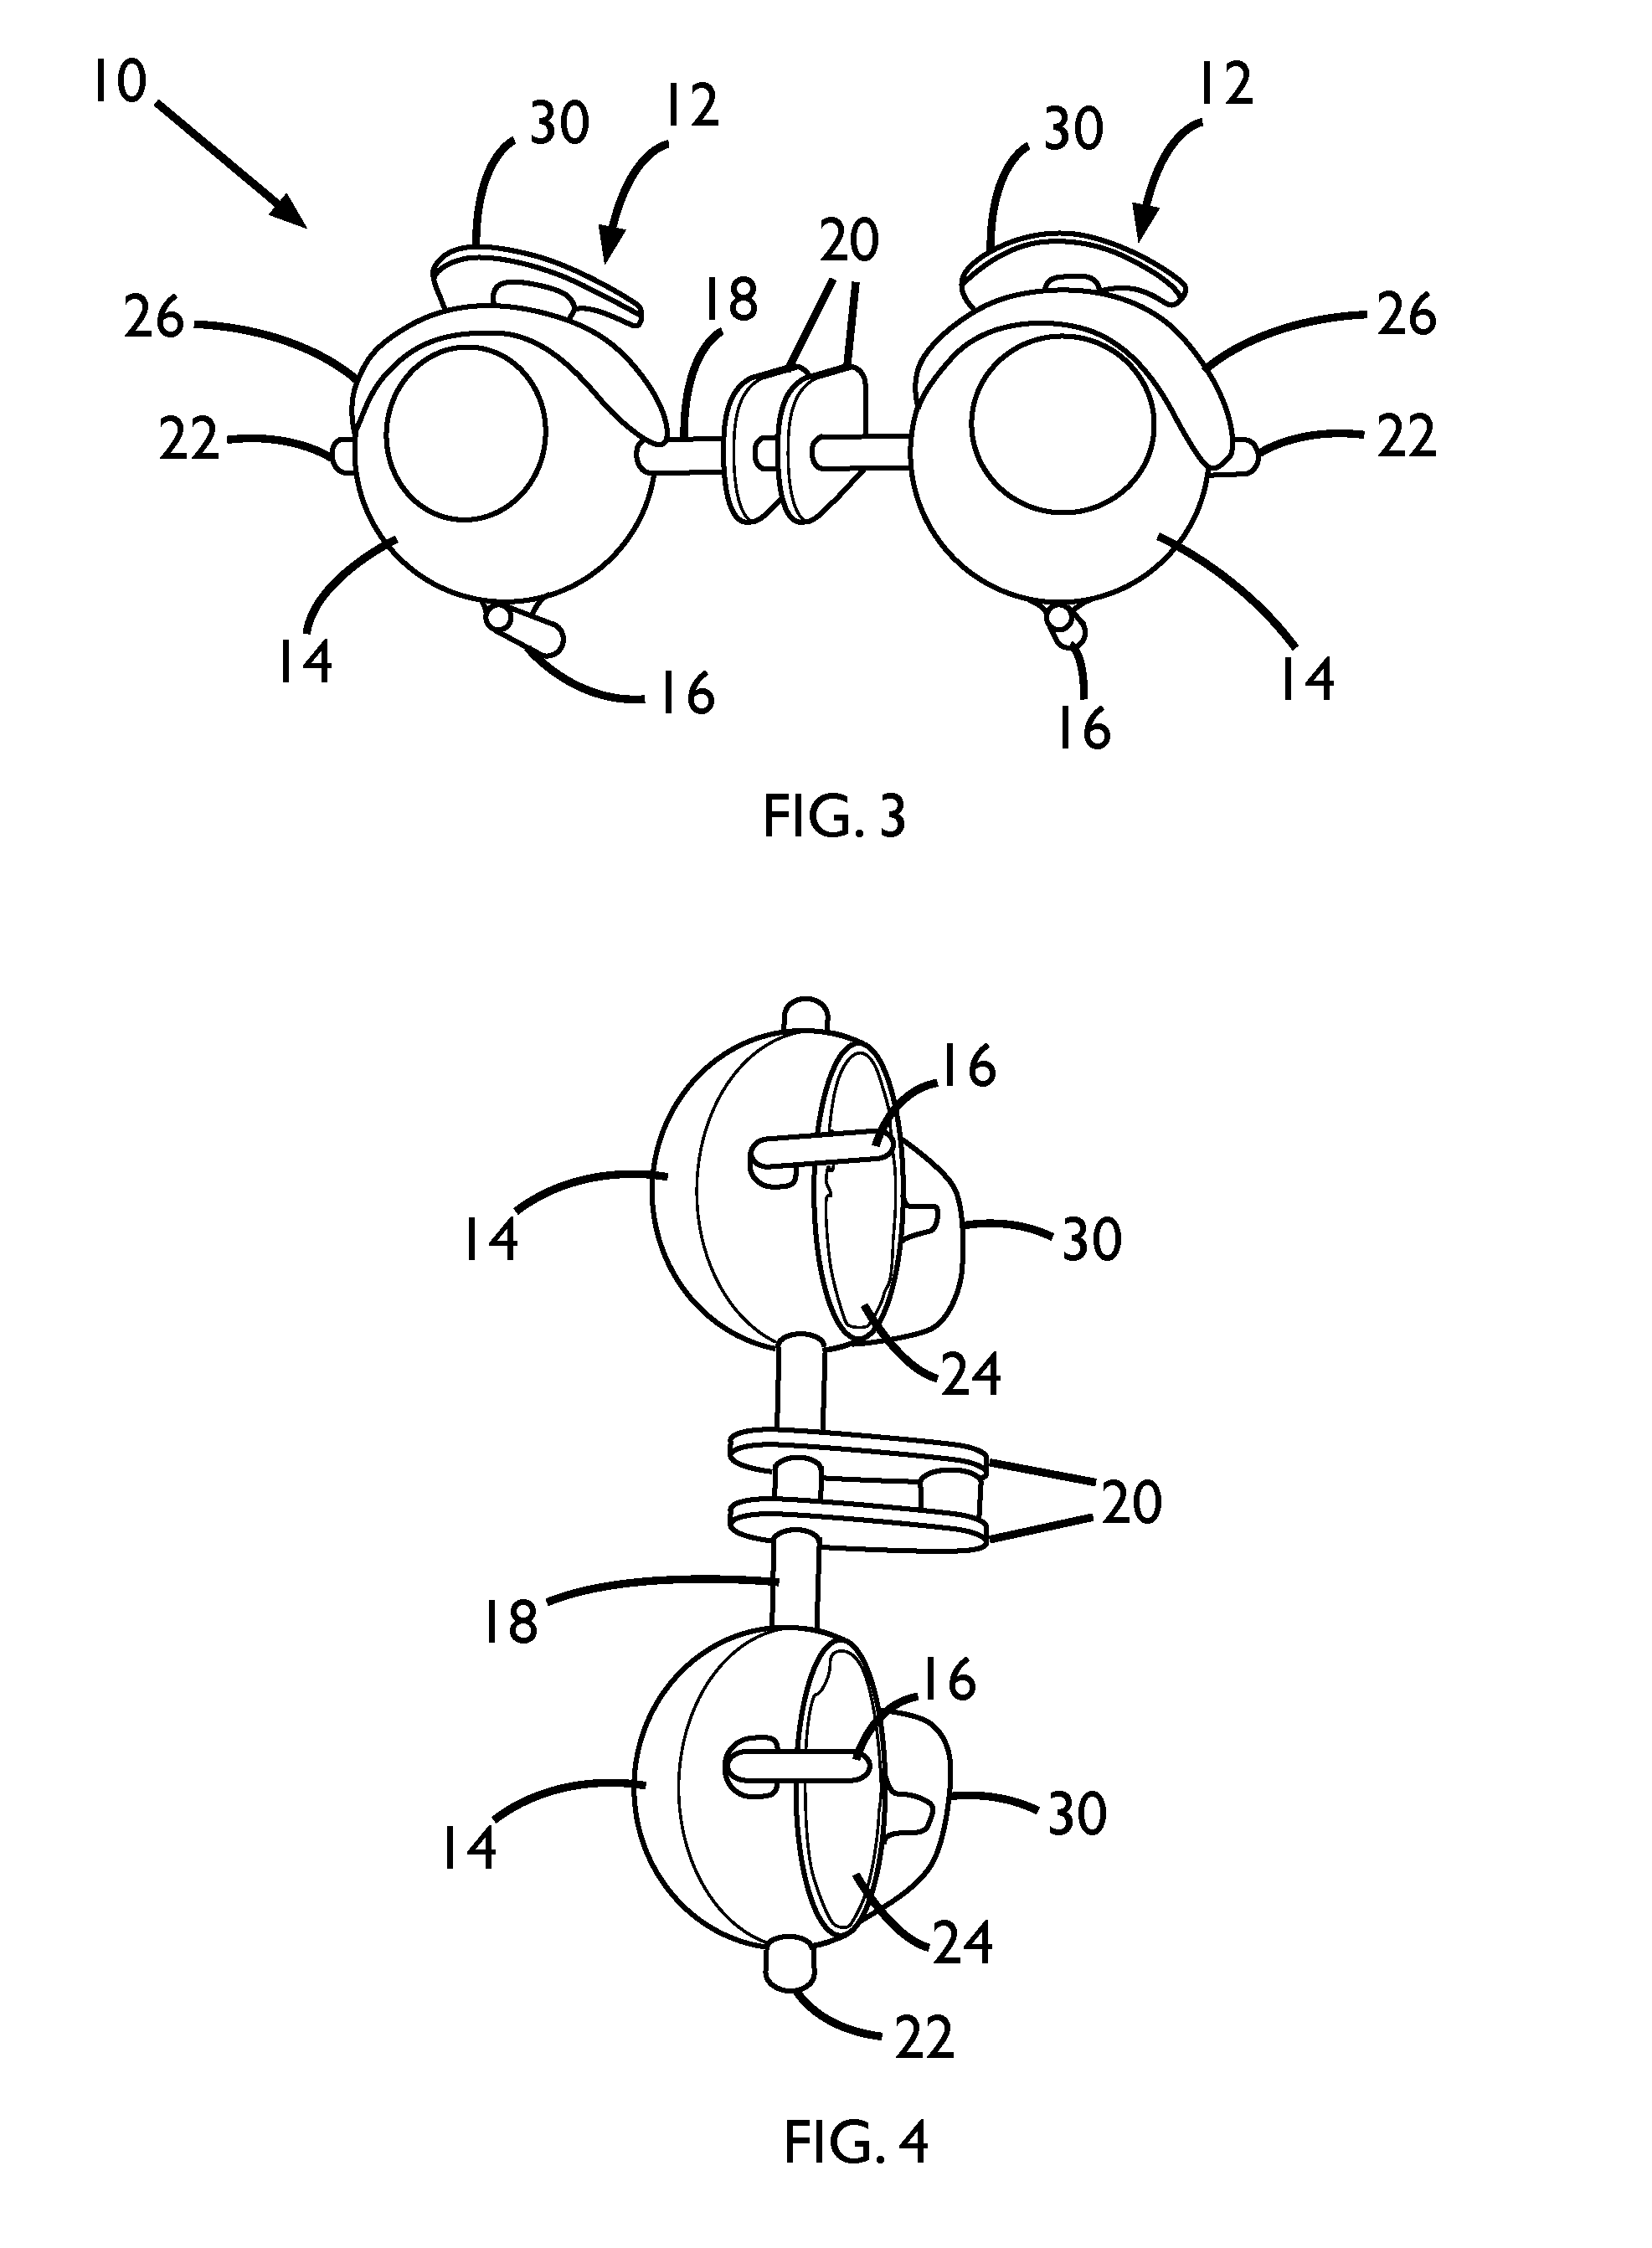 Method and apparatus for attaching plush to an artificial eye